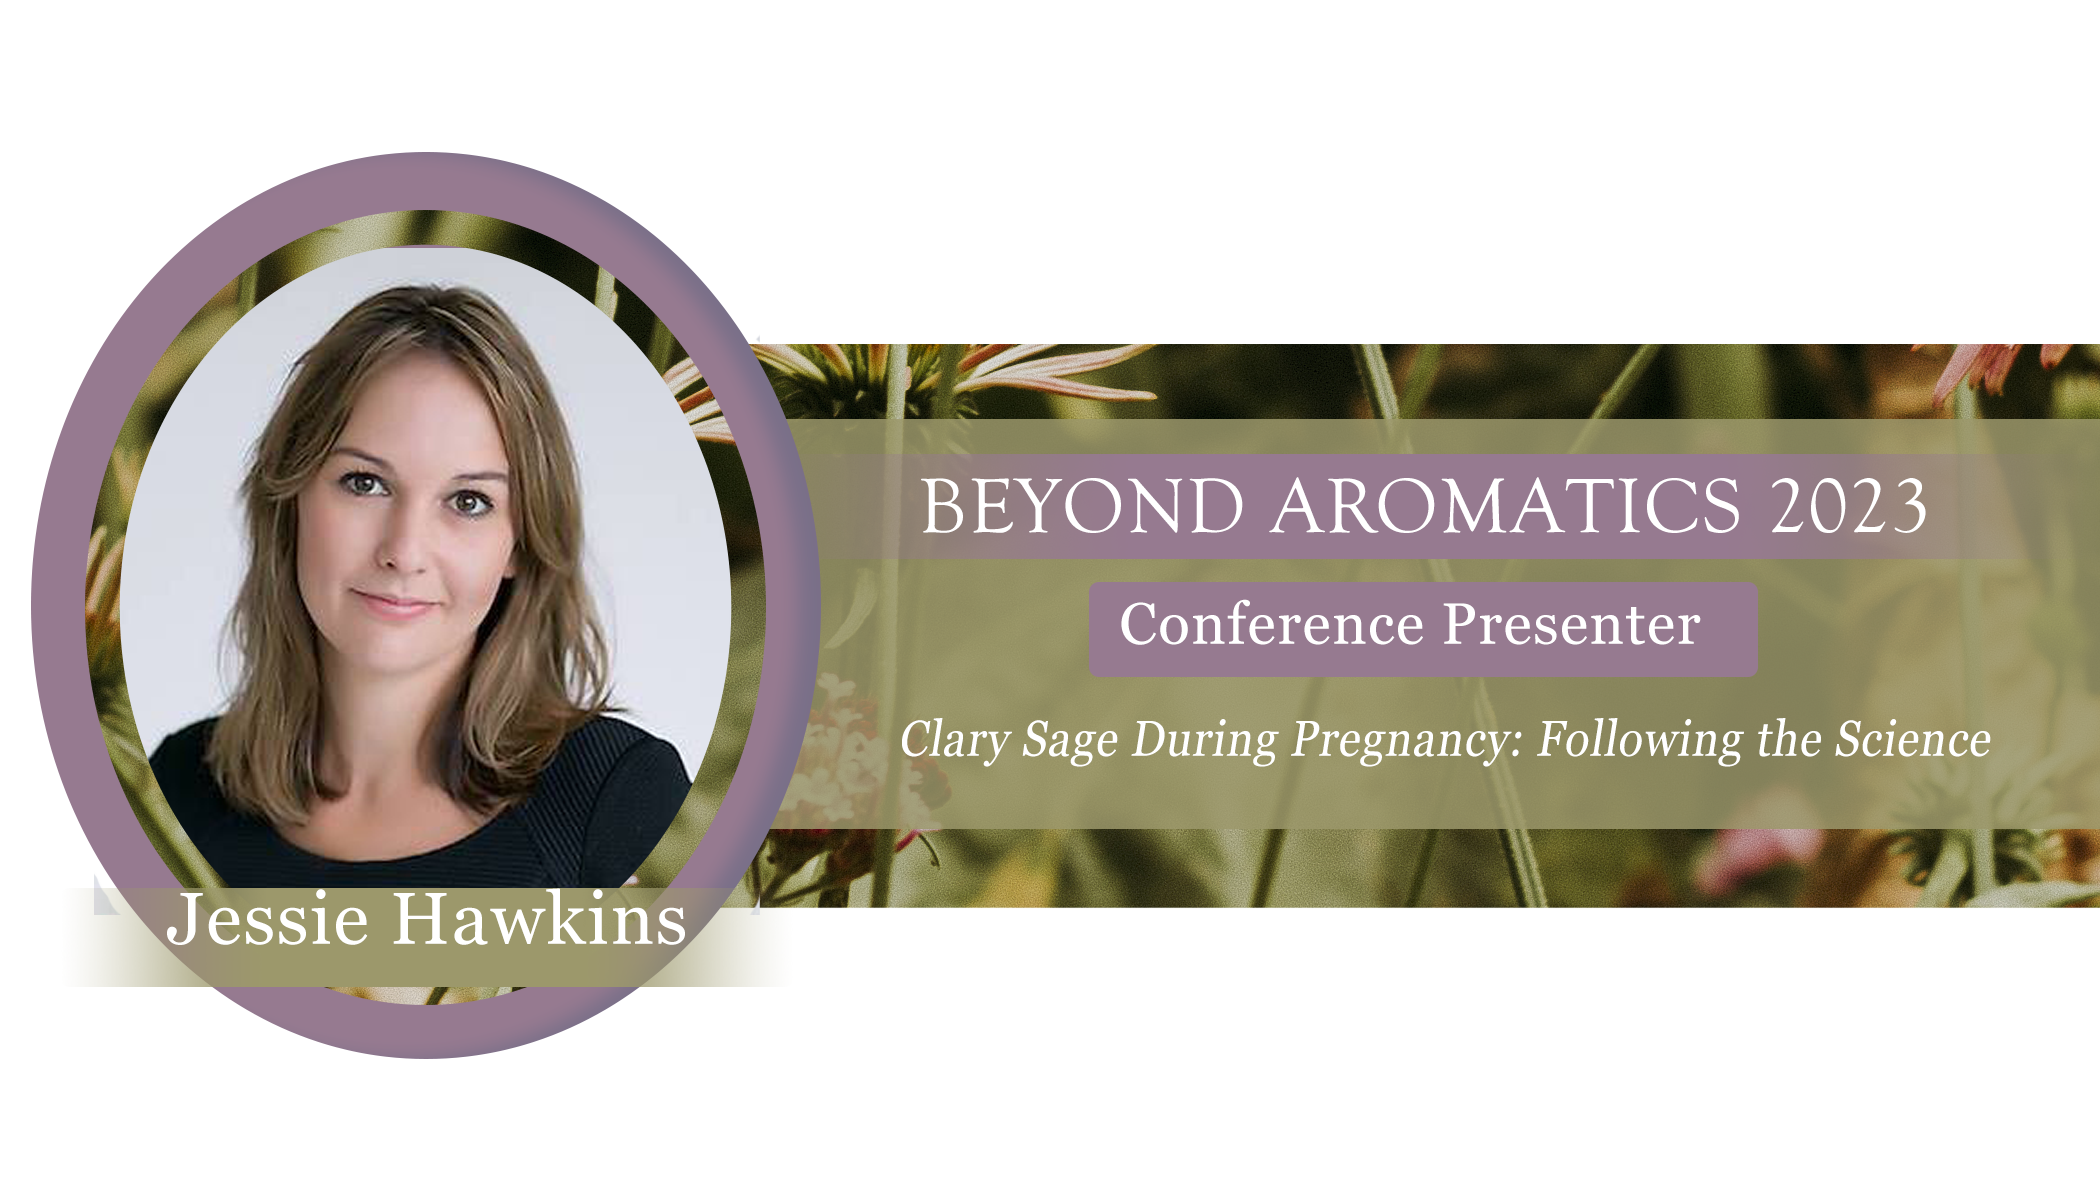 Clary Sage During Pregnancy: Following the Science